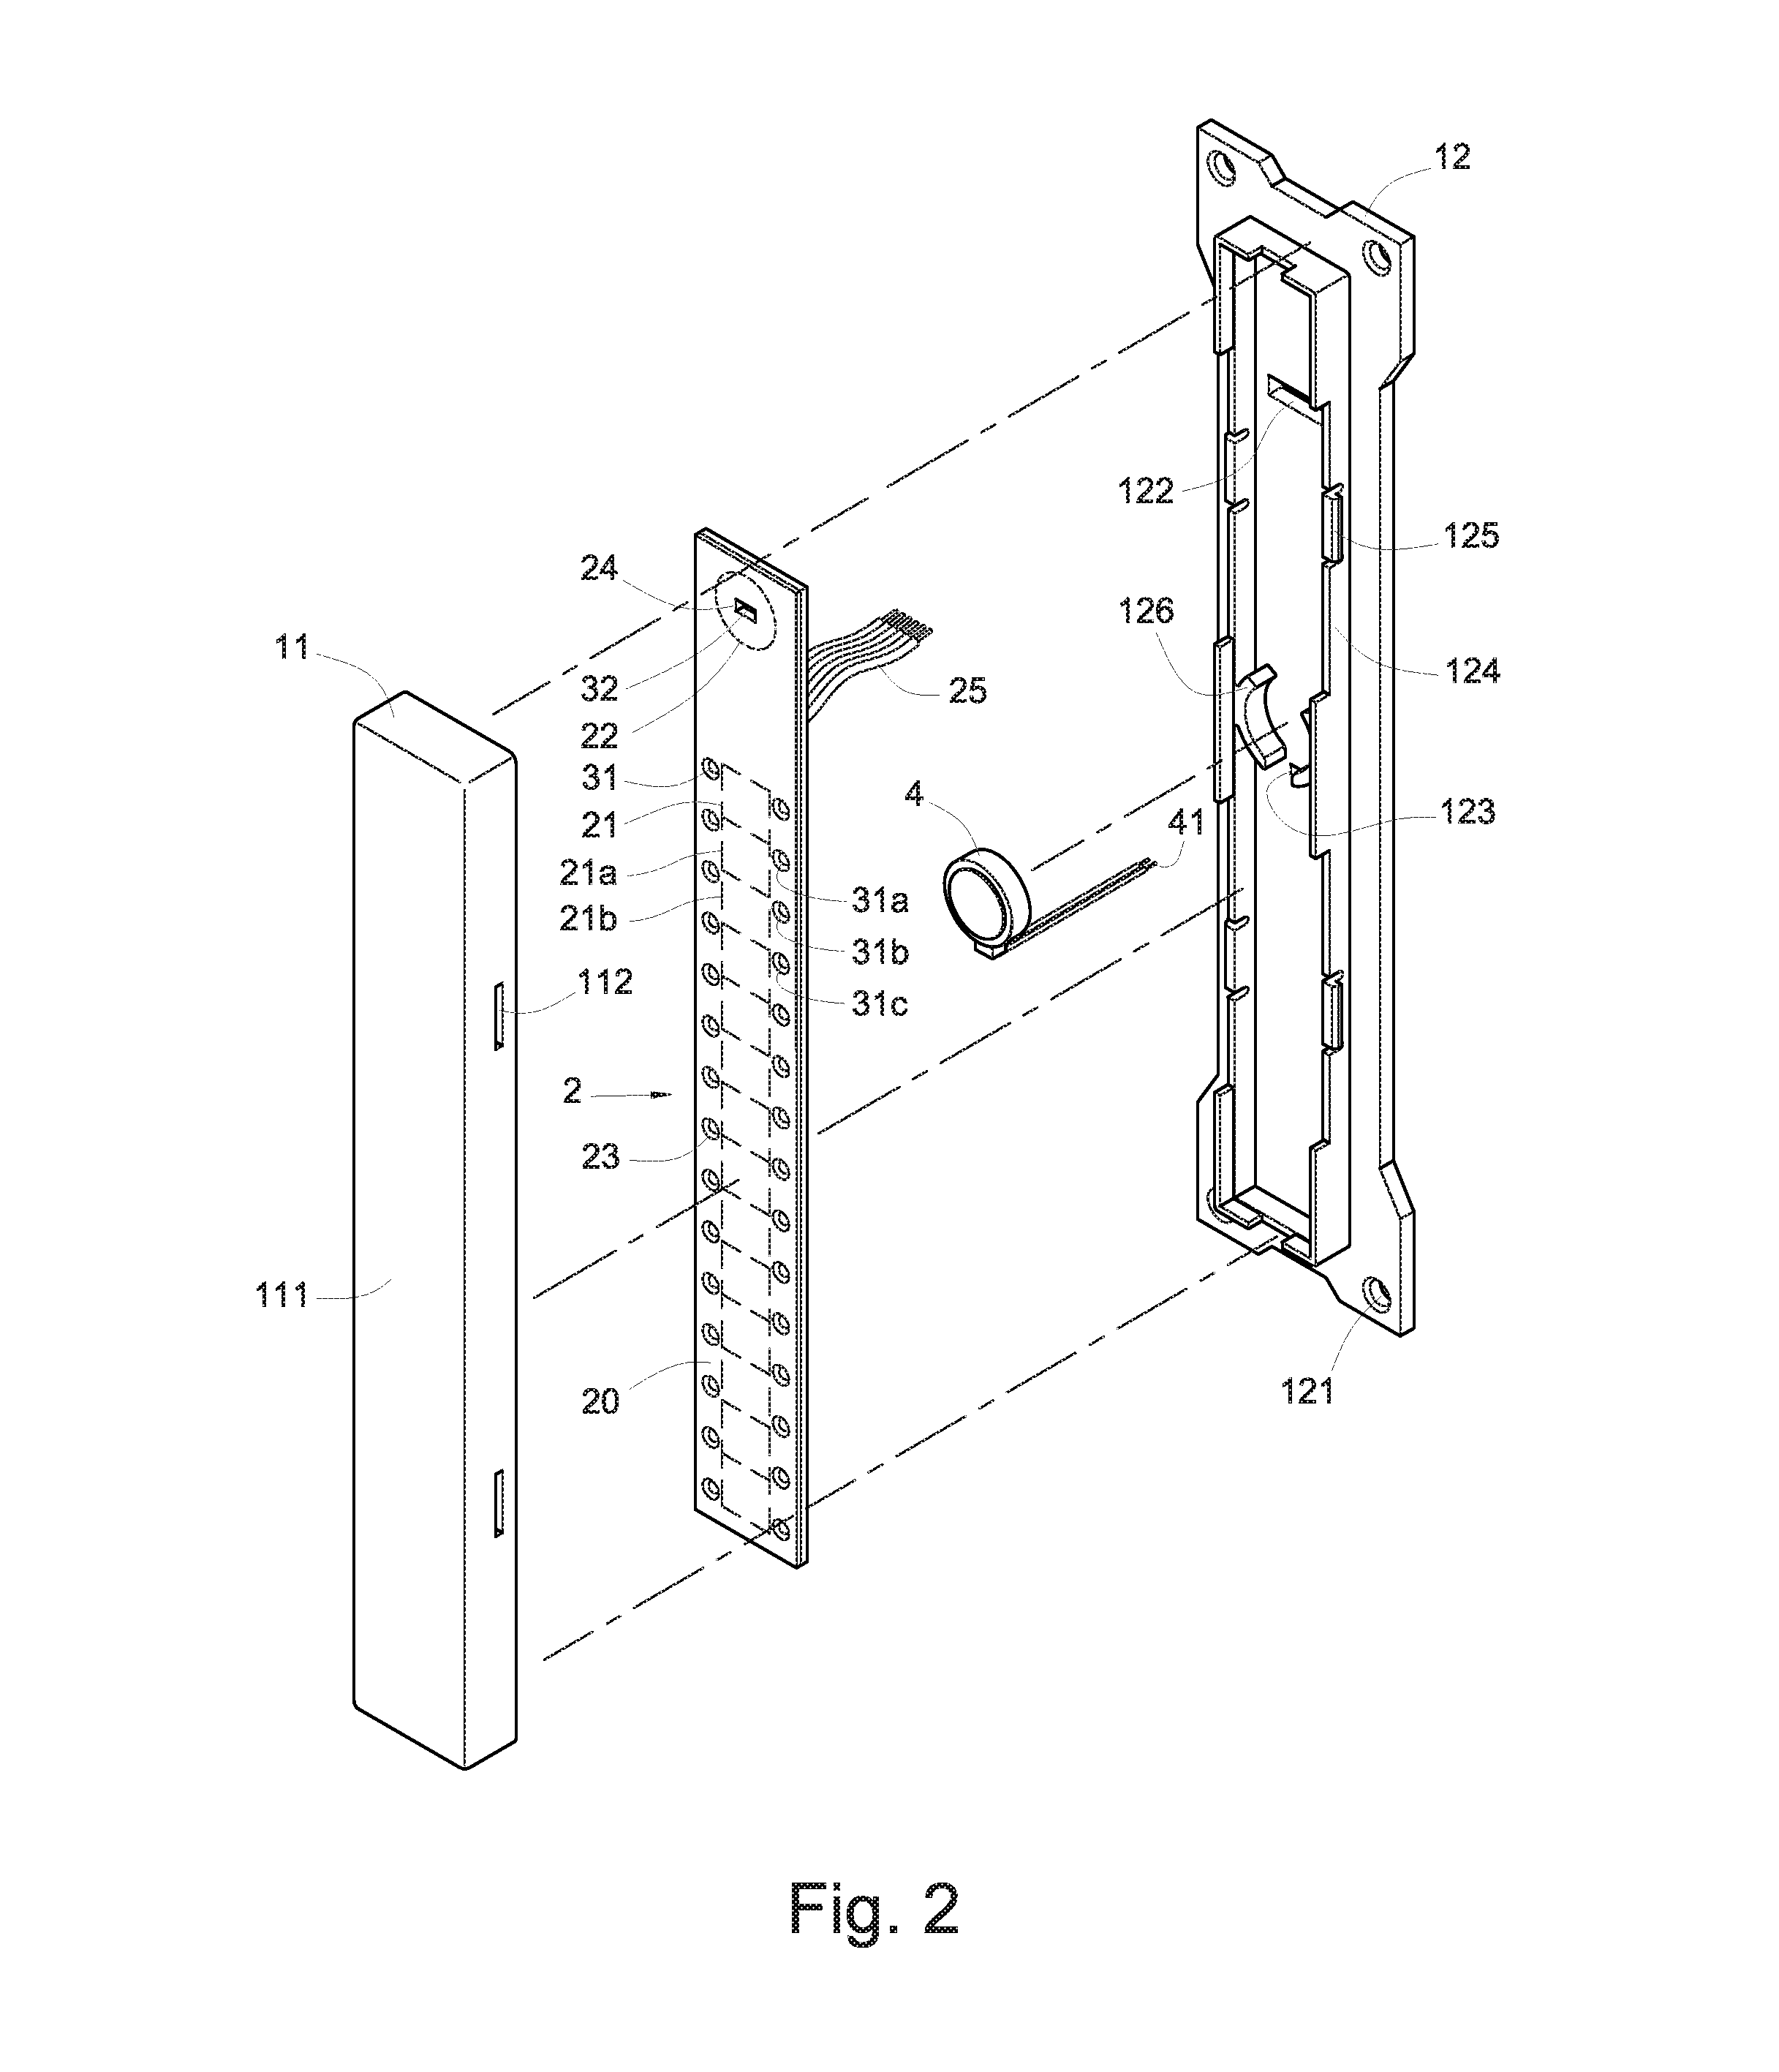 Photoelectric touch-sensitive linear adjustment switch for an electric appliance